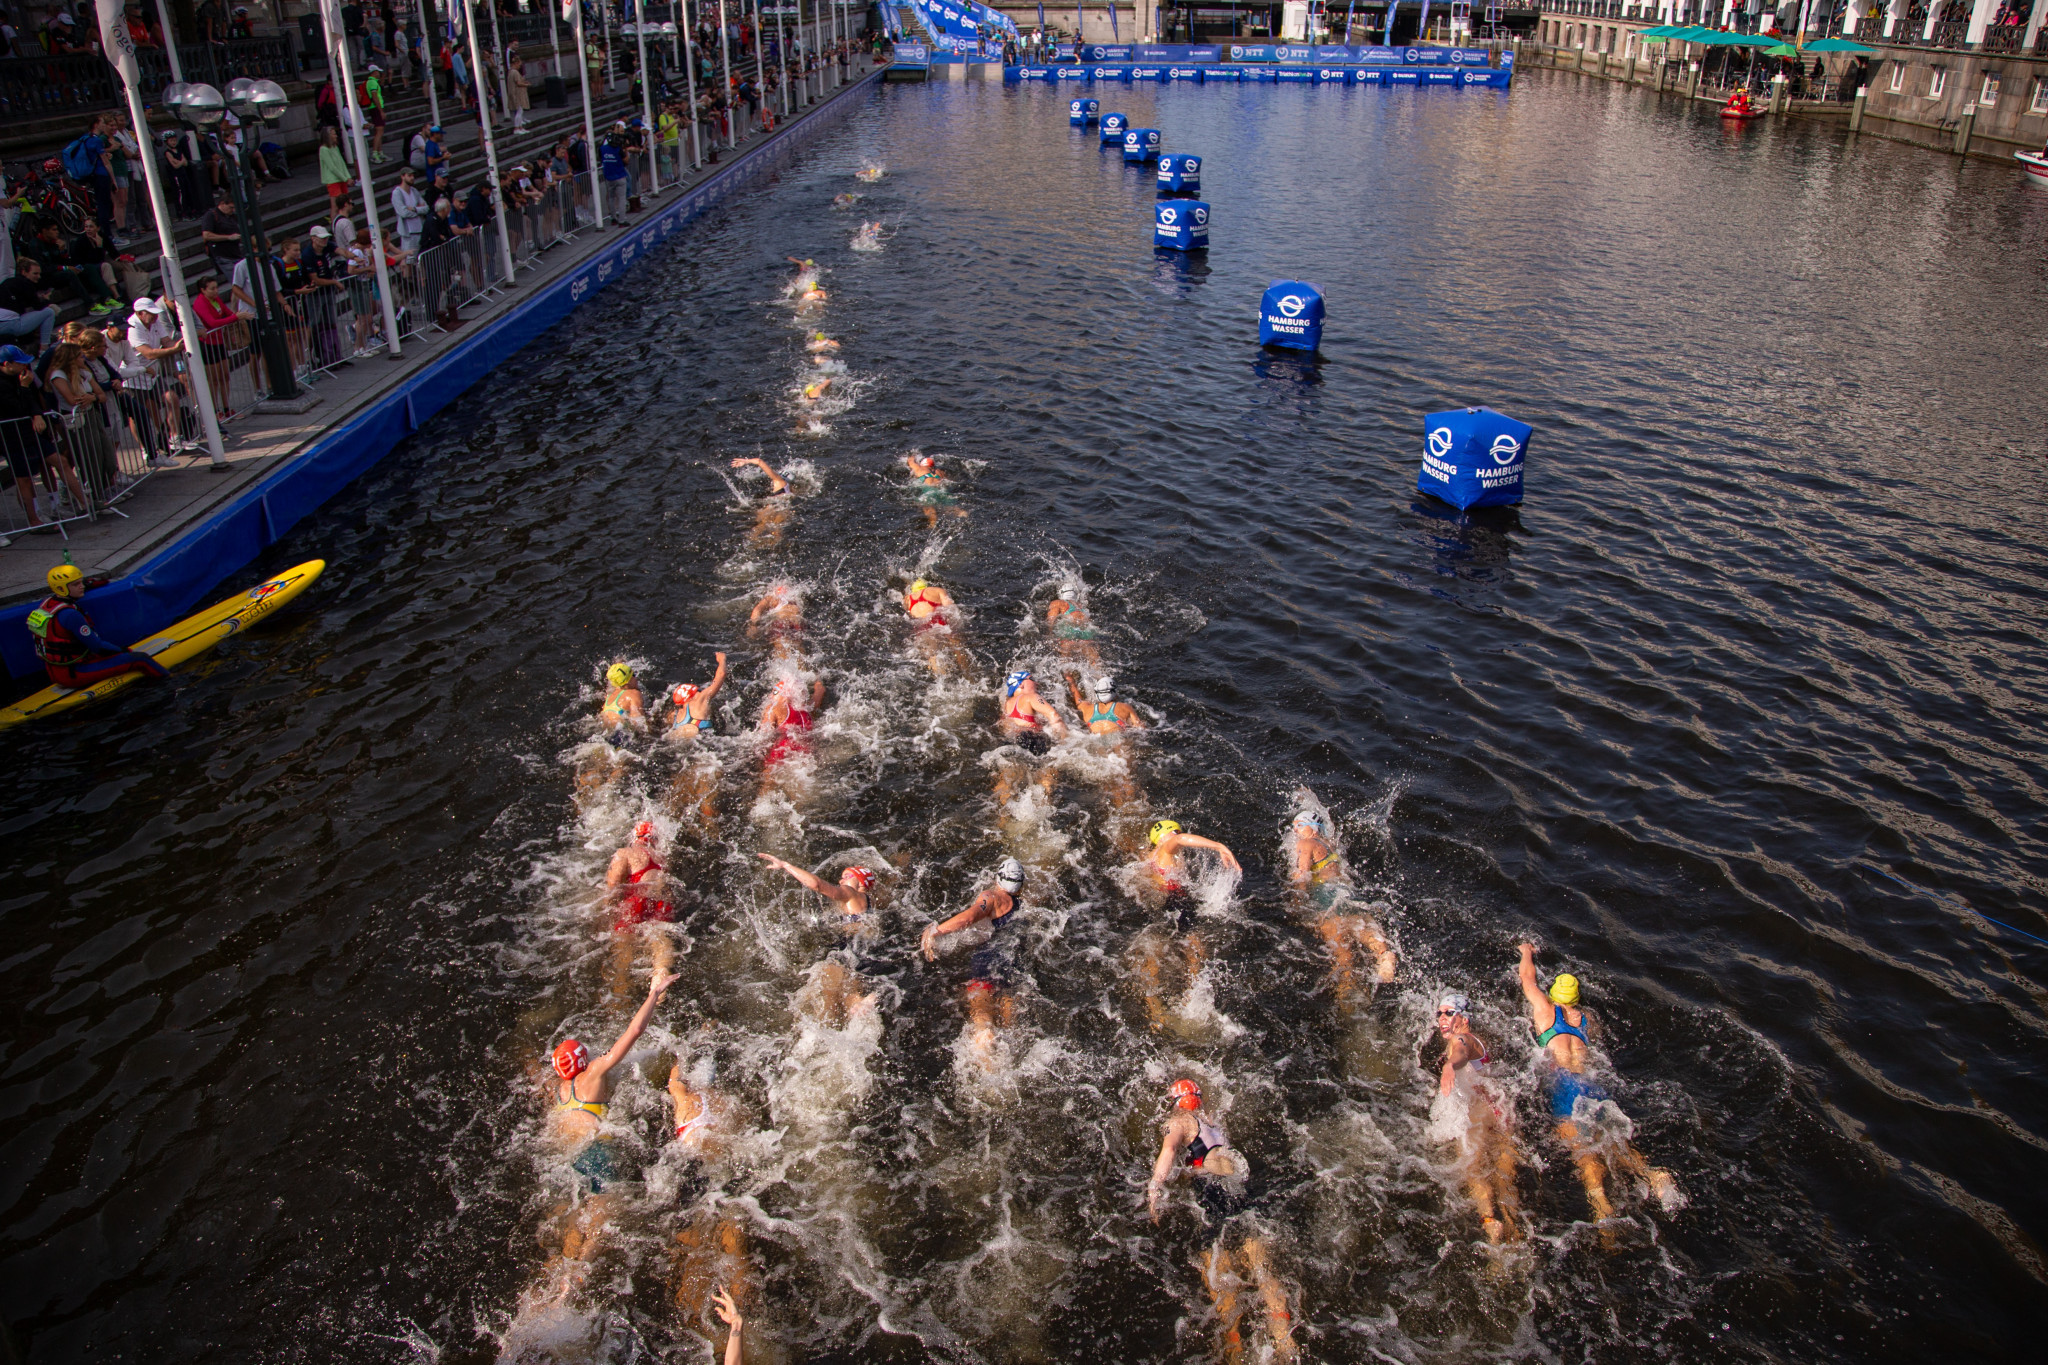 The first super-sprint world champions are set to be crowned tomorrow at the finals in Hamburg ©World Triathlon